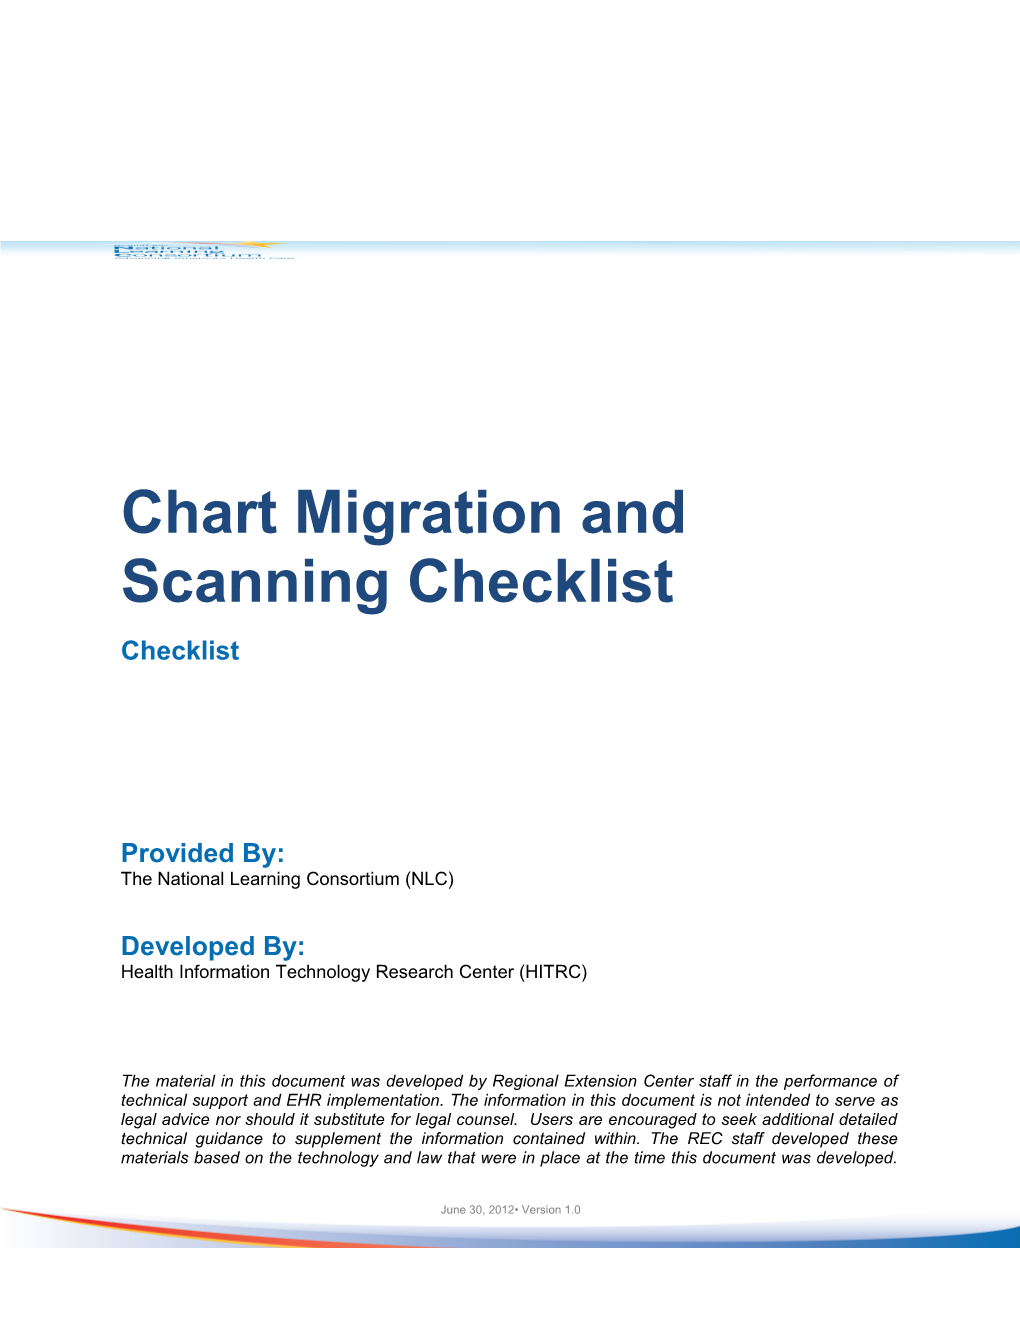 Chart Migration and Scanning Checklist